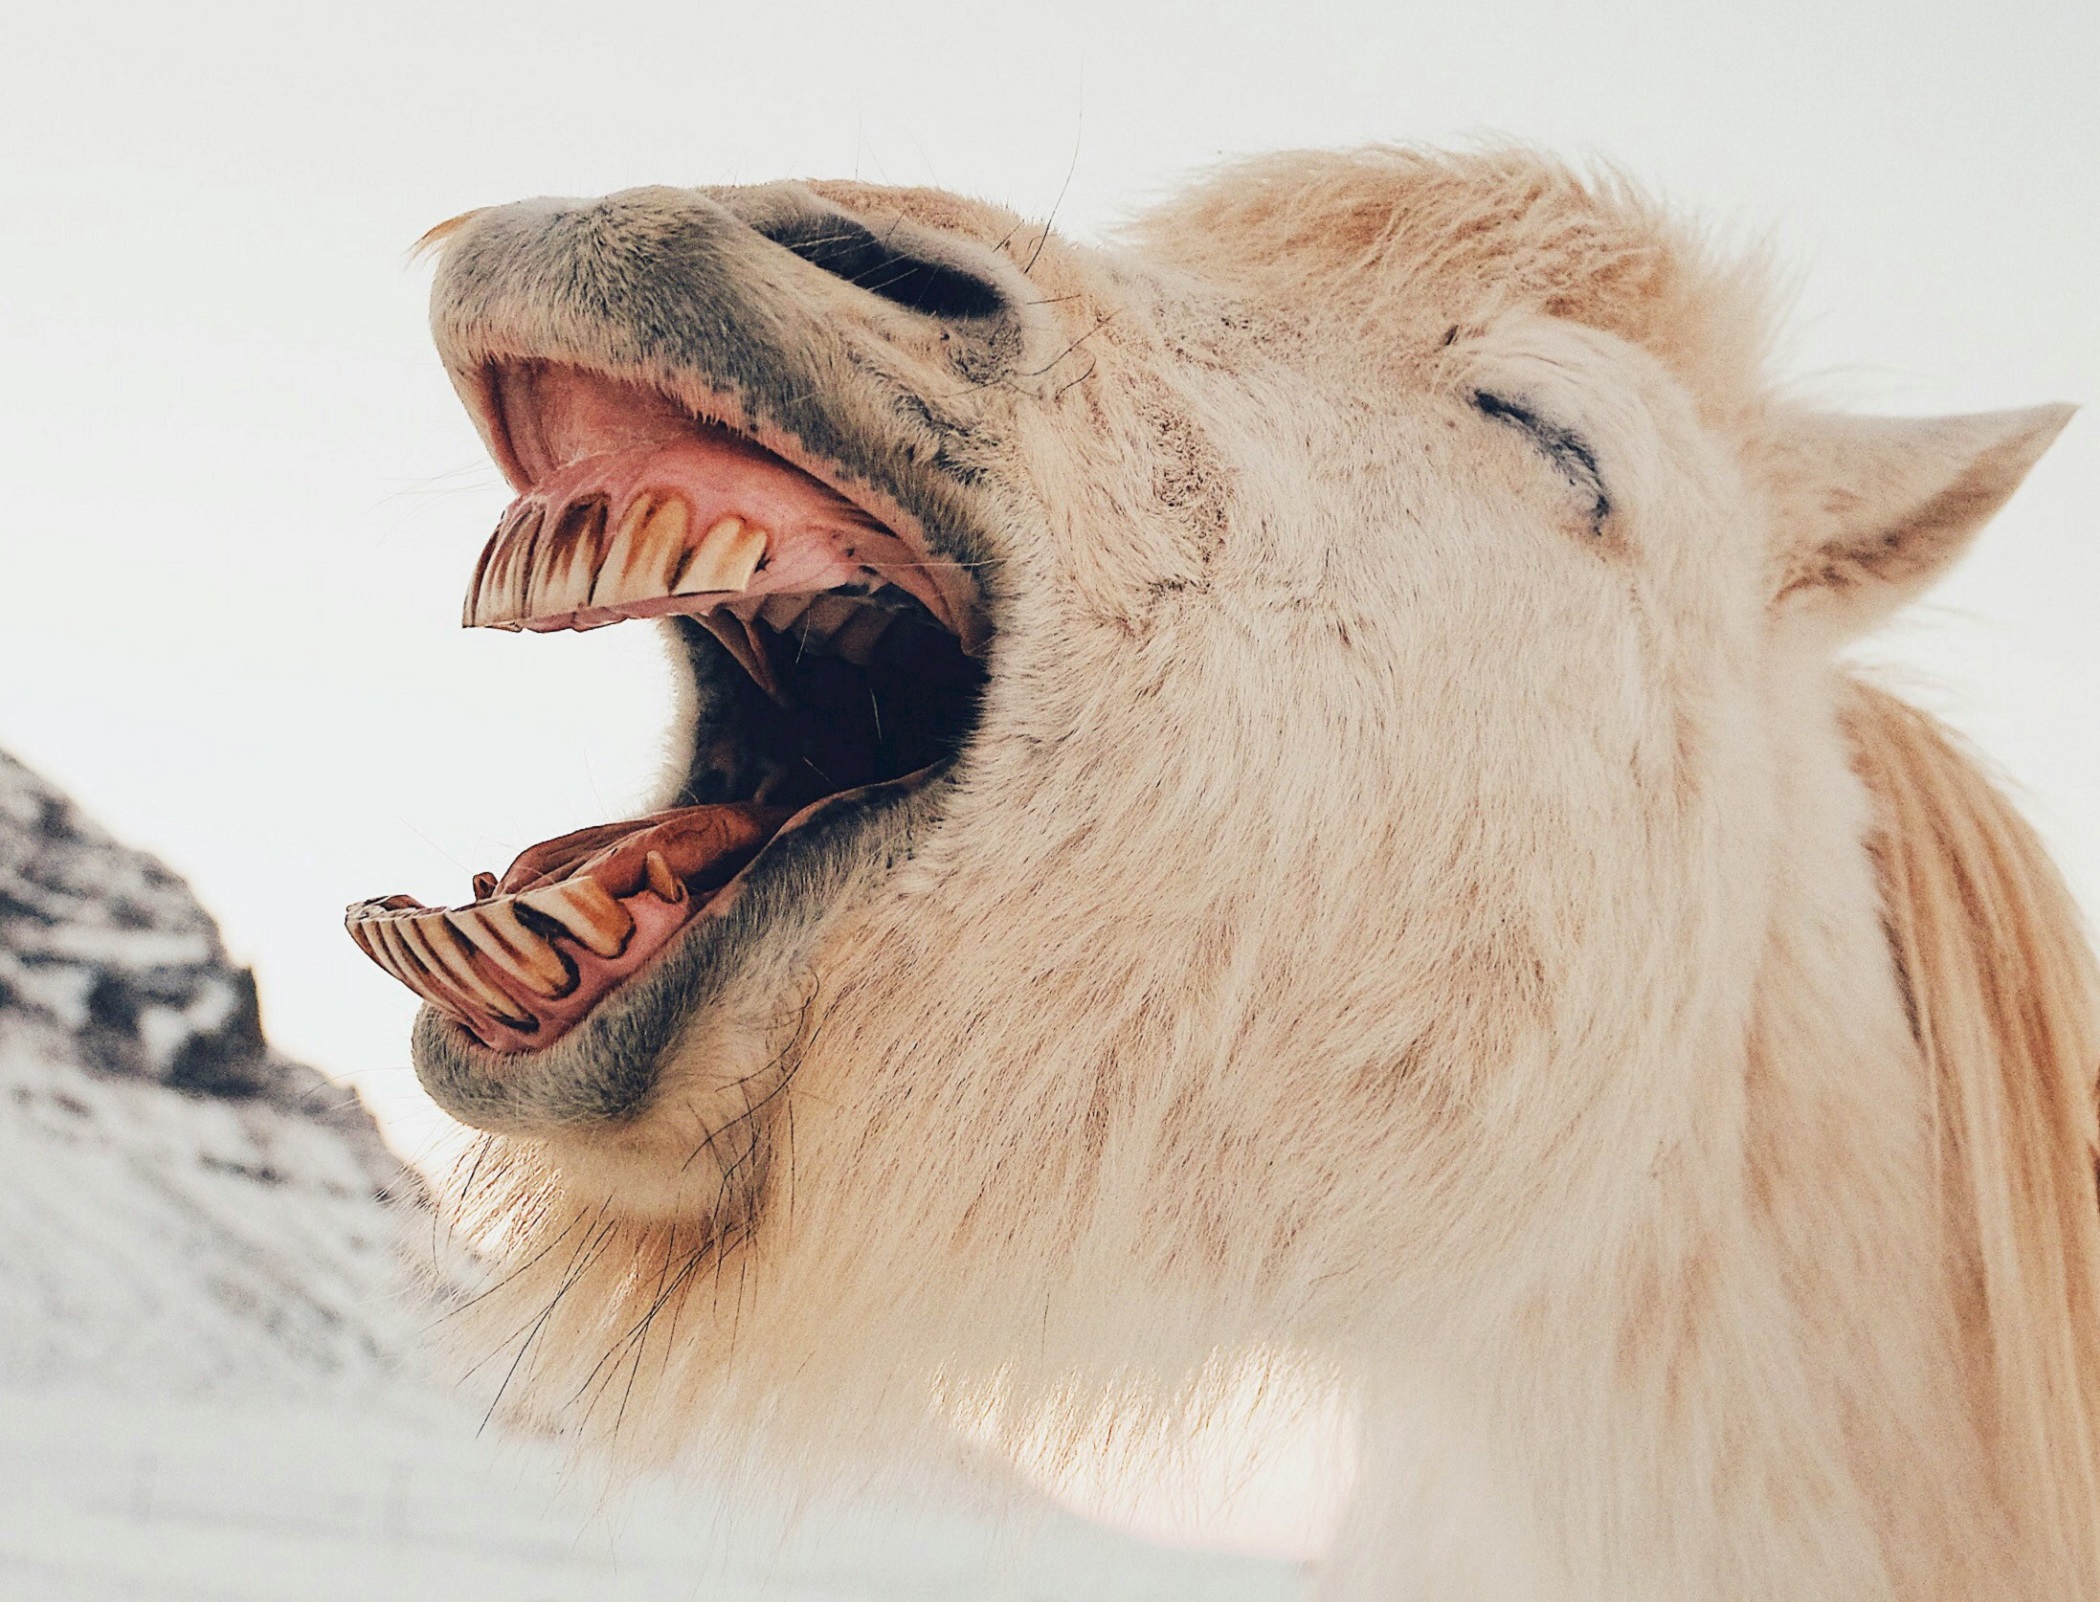 Cream-colored horse with its mouth open in what looks like a laugh.